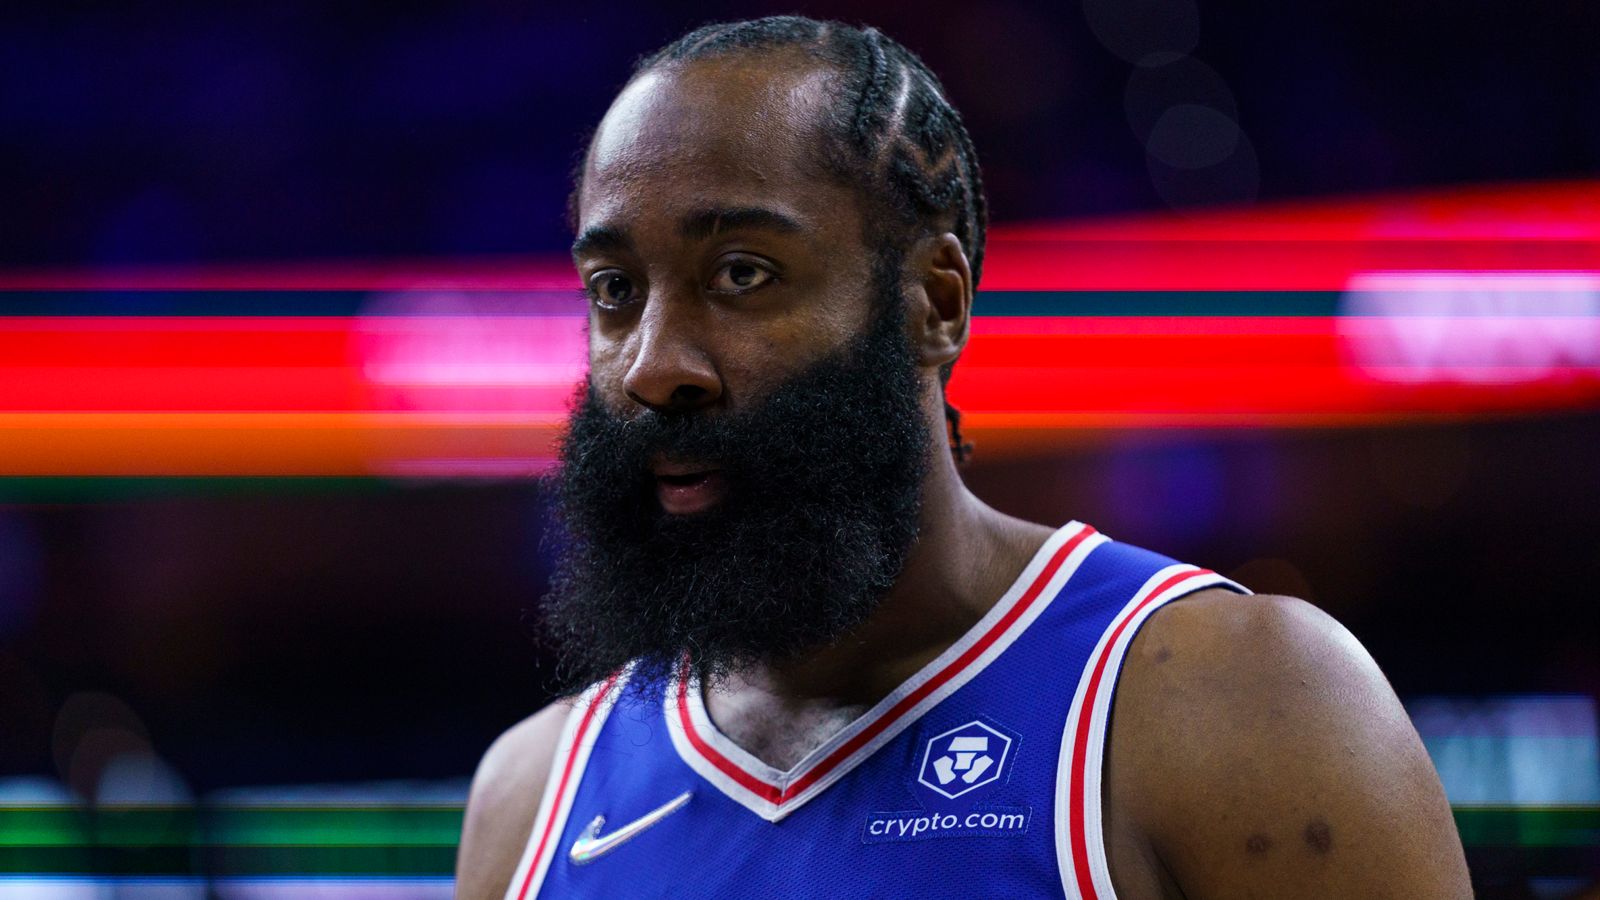 NBA insiders reveal why Harden may return to the Houston Rockets